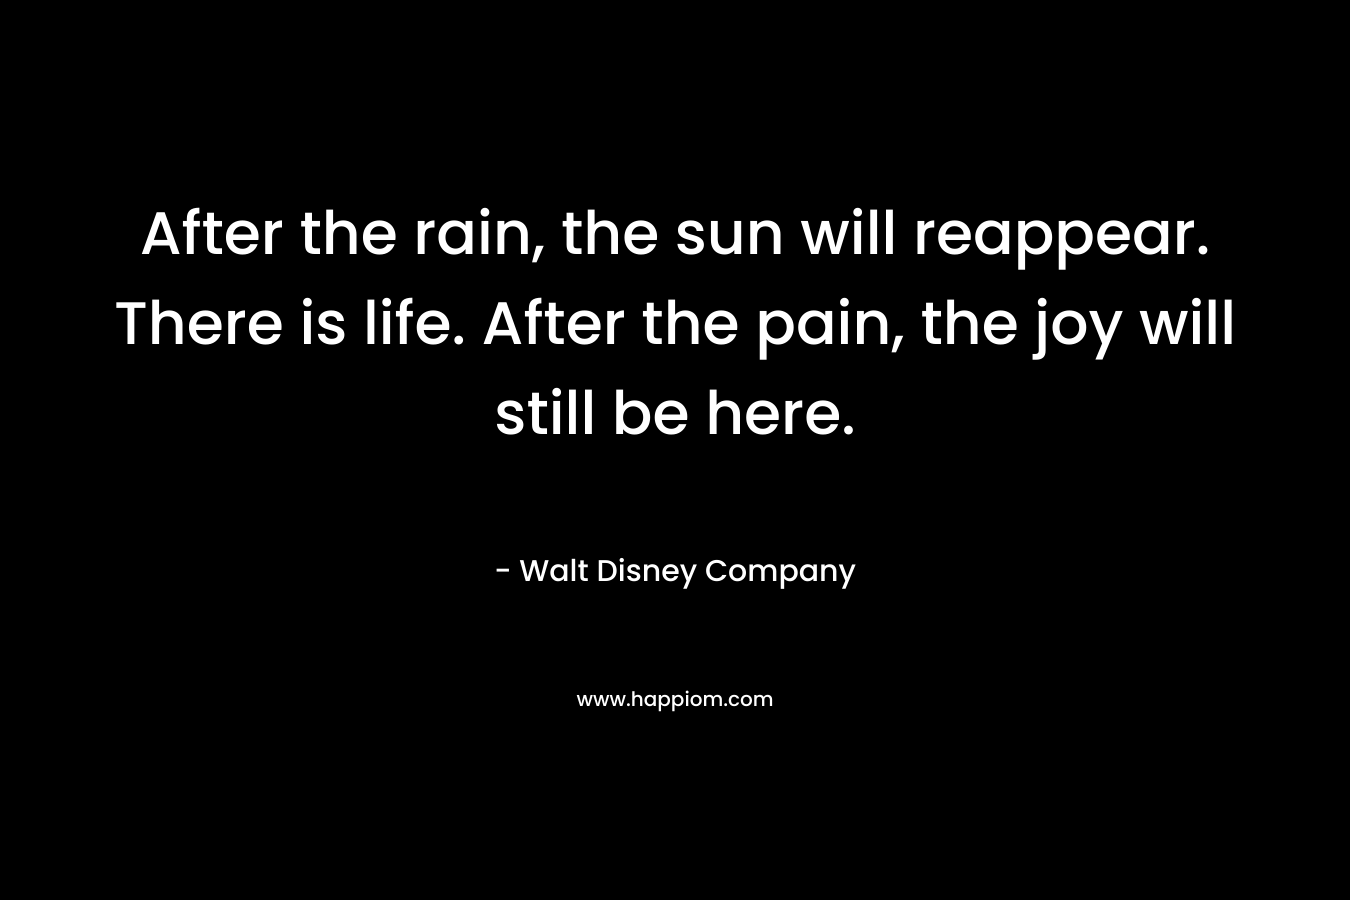 After the rain, the sun will reappear. There is life. After the pain, the joy will still be here.